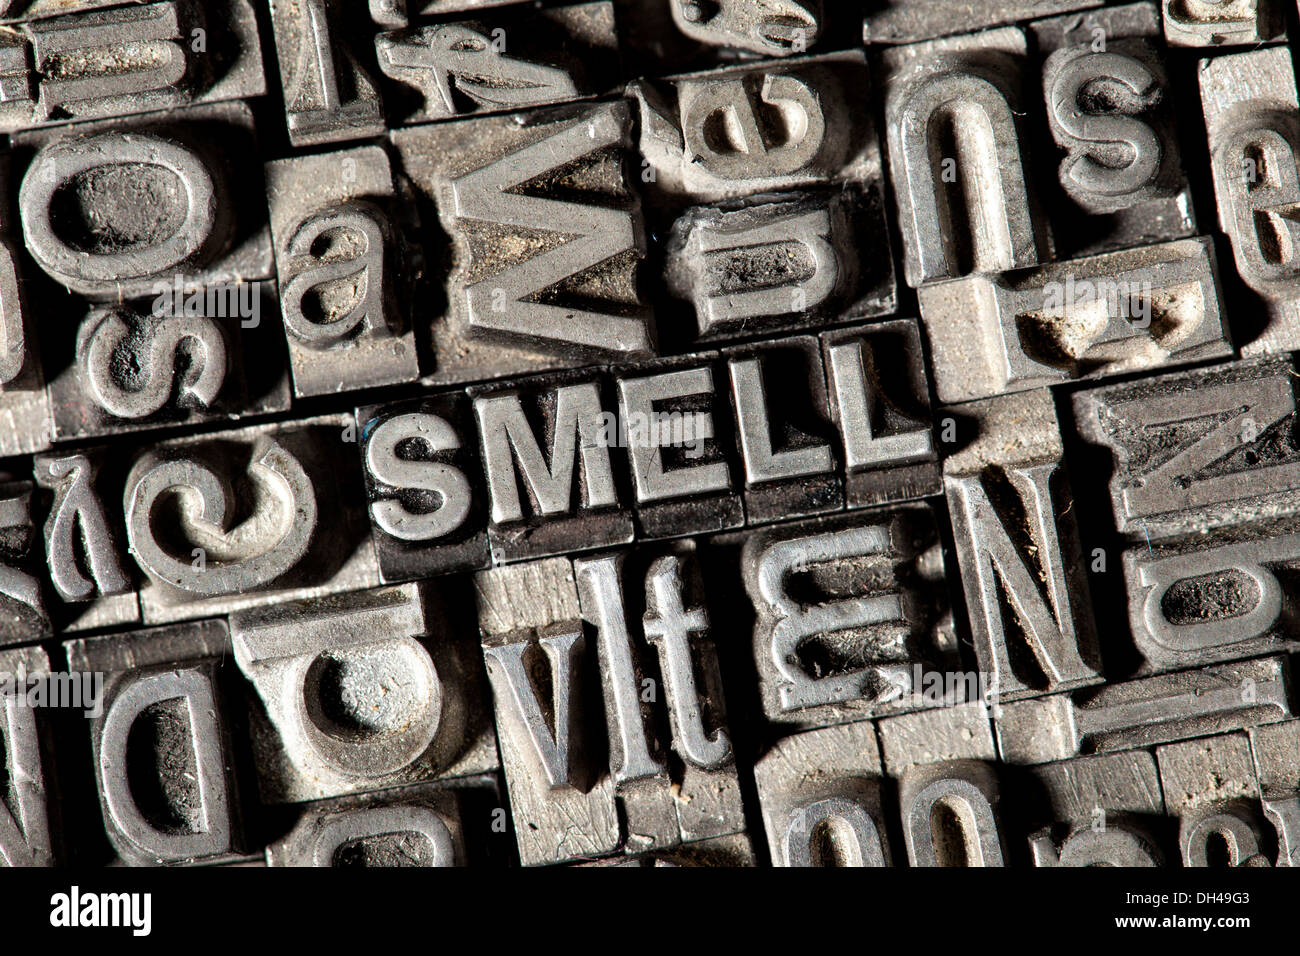 Old lead letters forming the word SMELL Stock Photo